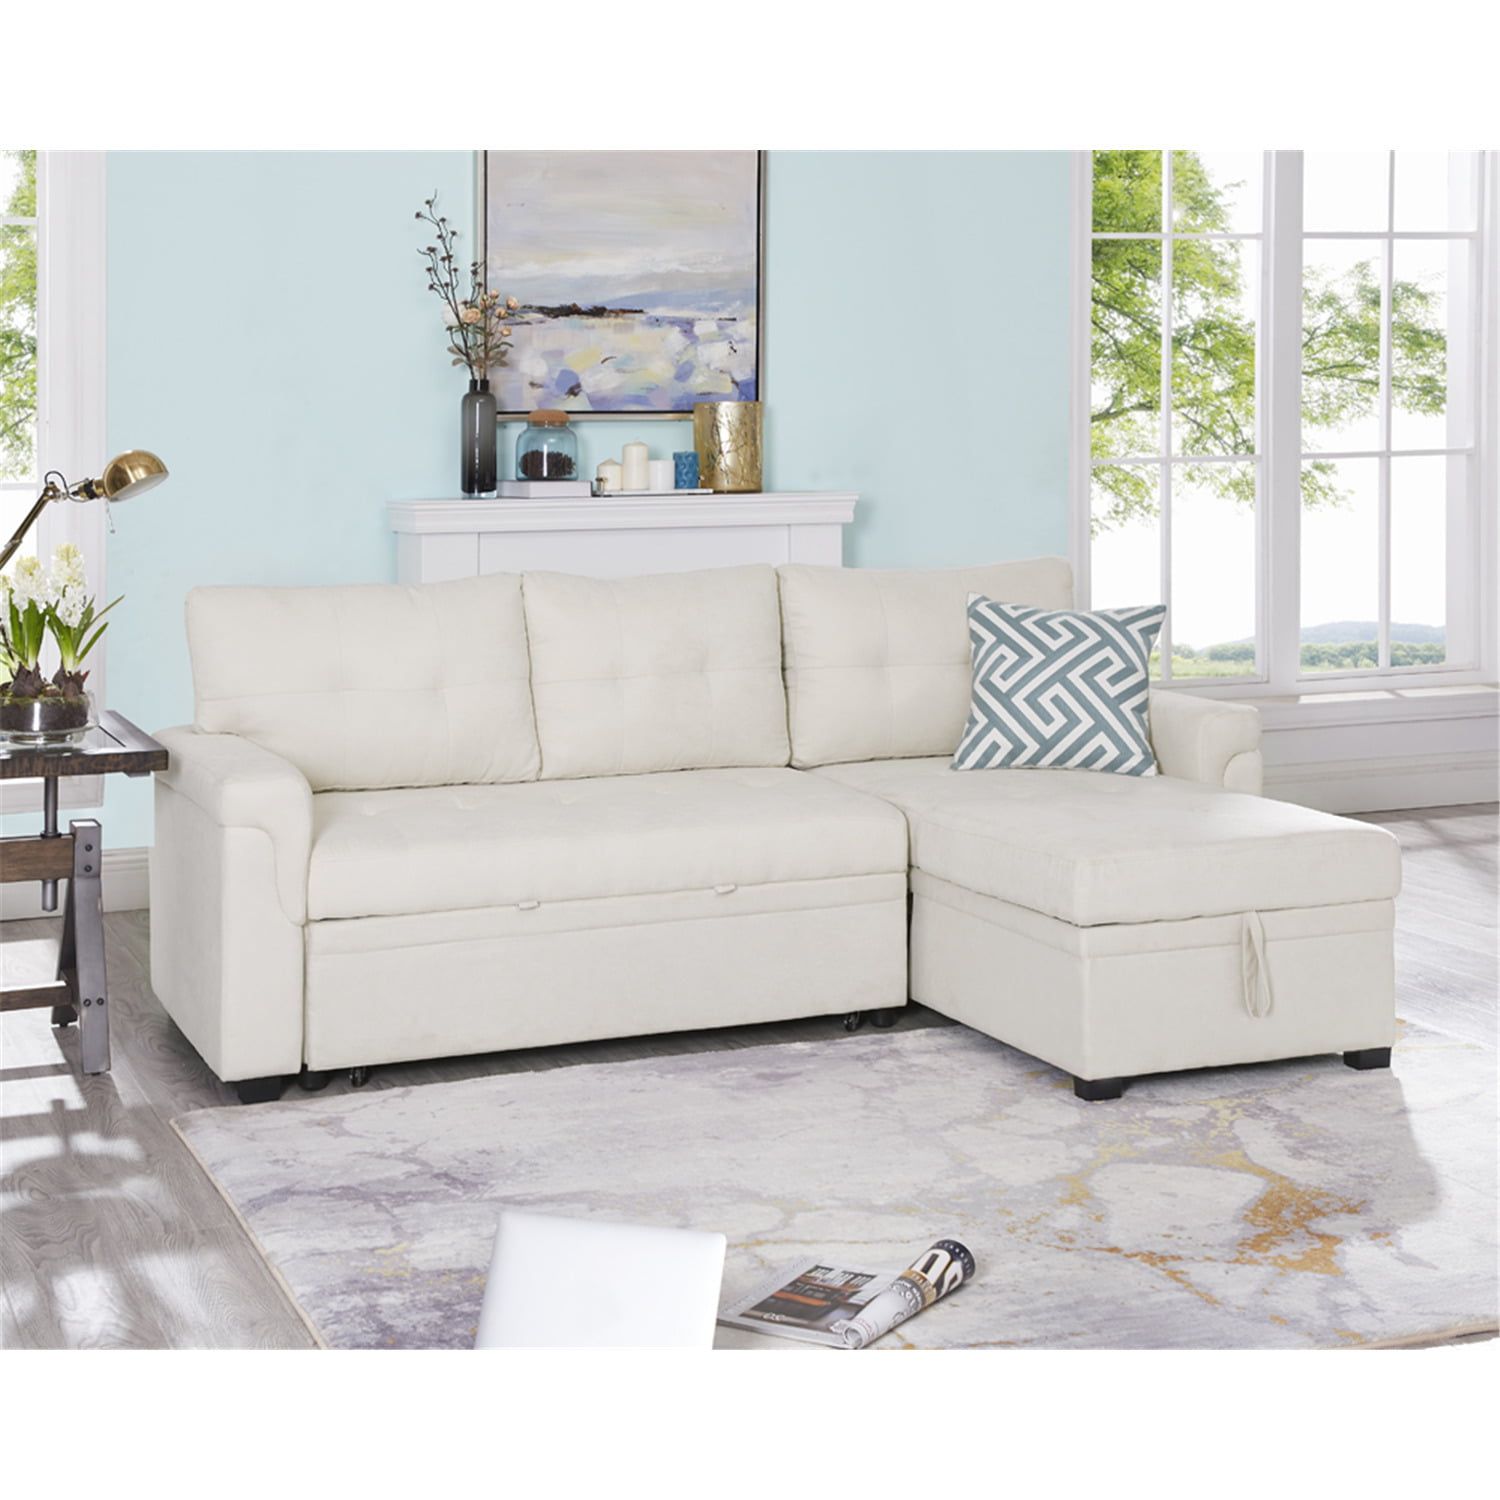 Naomi Home Laura Sectional Sleeper Sofa – Elegant L Shaped Couch  Convertible Pull Out Bed, Ample Storage, Timeless Design, Sturdy  Construction, Long Lasting For Modern Living, Velvet, Cream – Walmart For Reversible Pull Out Sofa Couches (View 18 of 20)